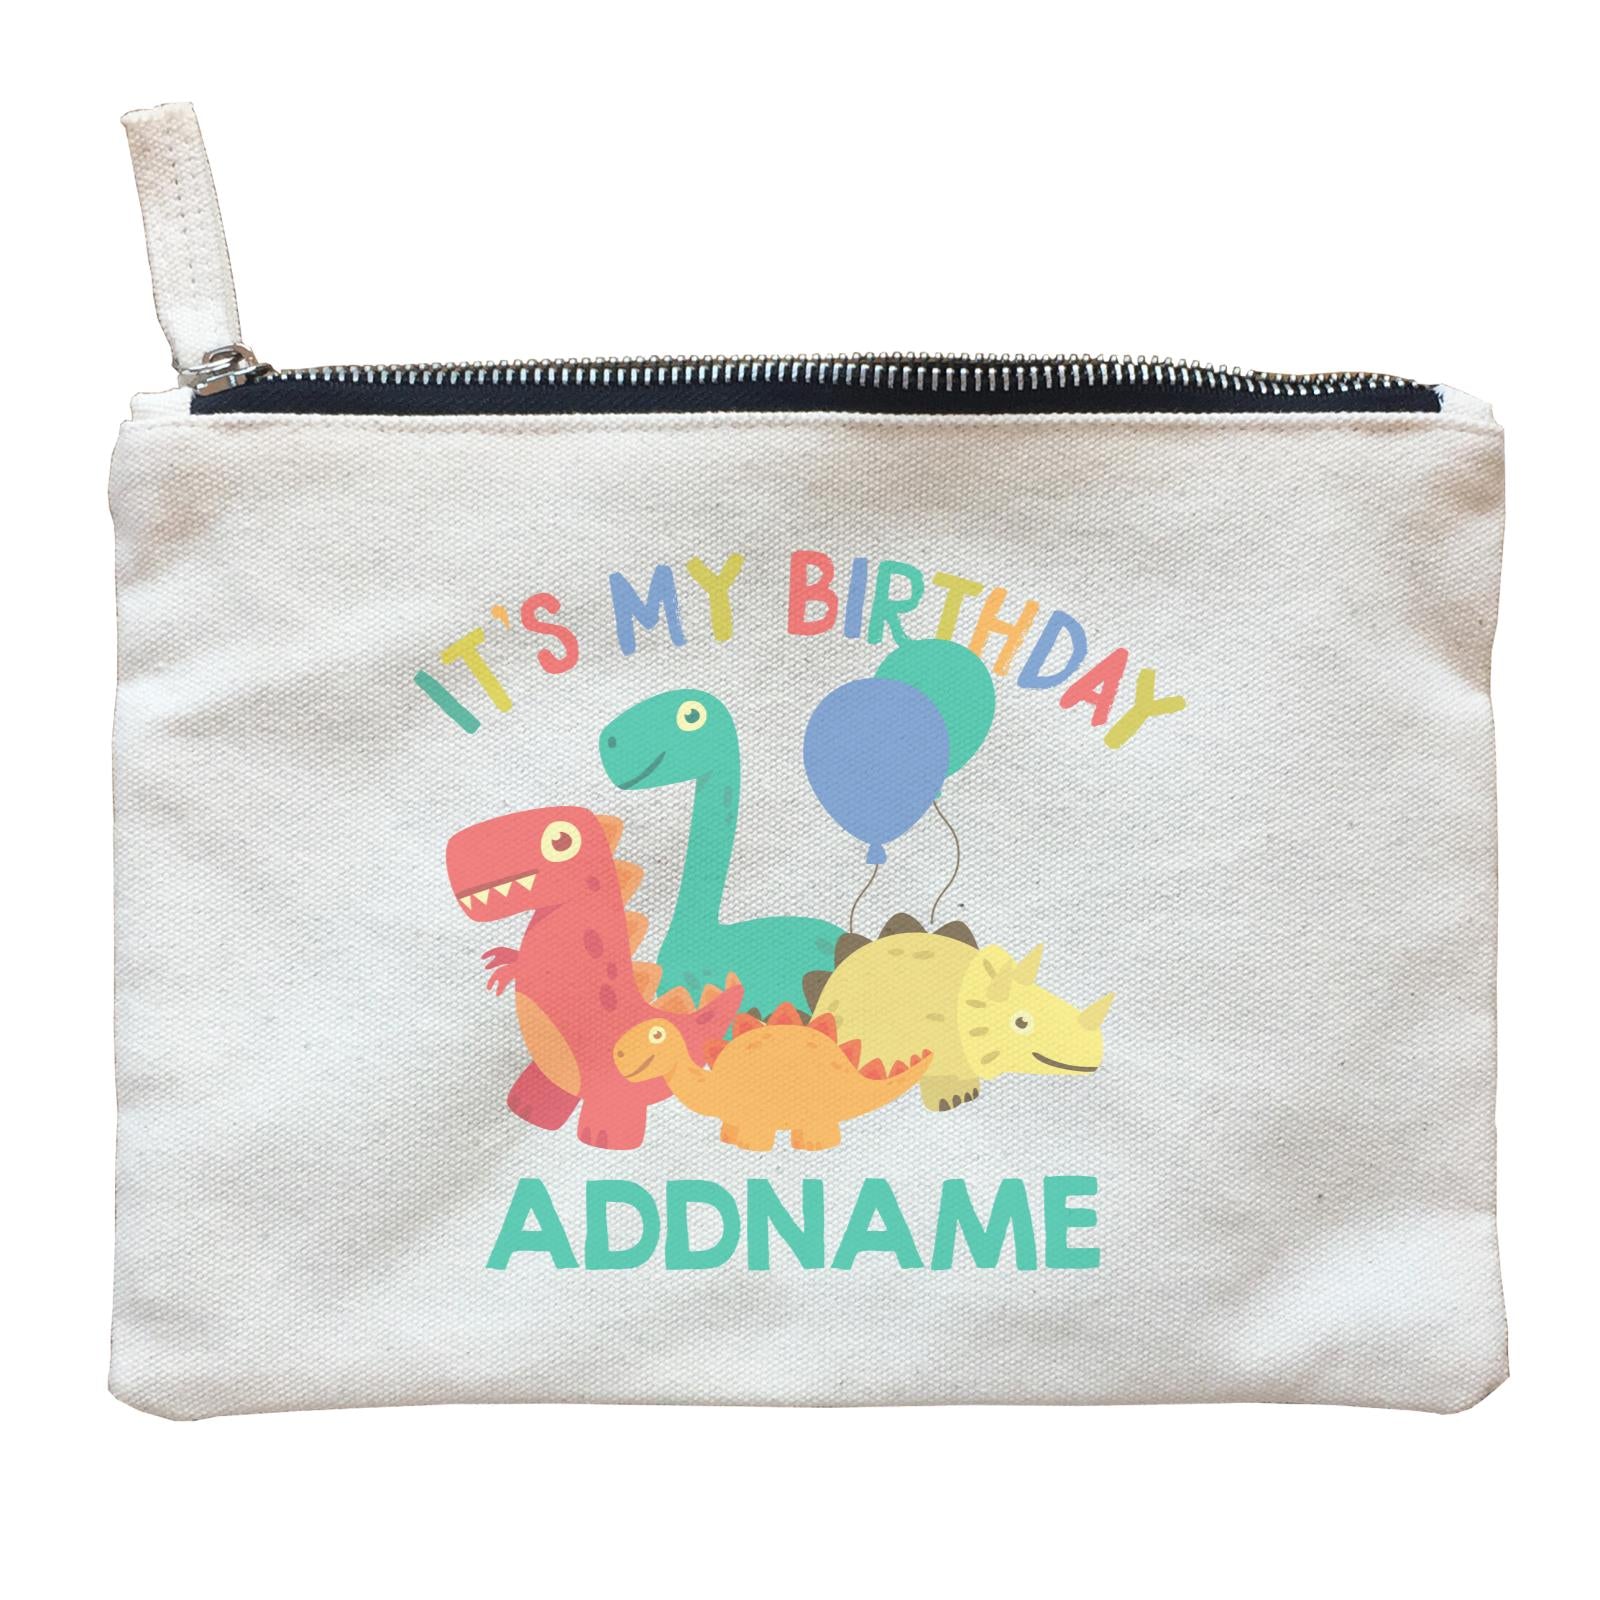 It's My Birthday Addname with Cute Dinosaurs and Balloons Birthday Theme Zipper Pouch